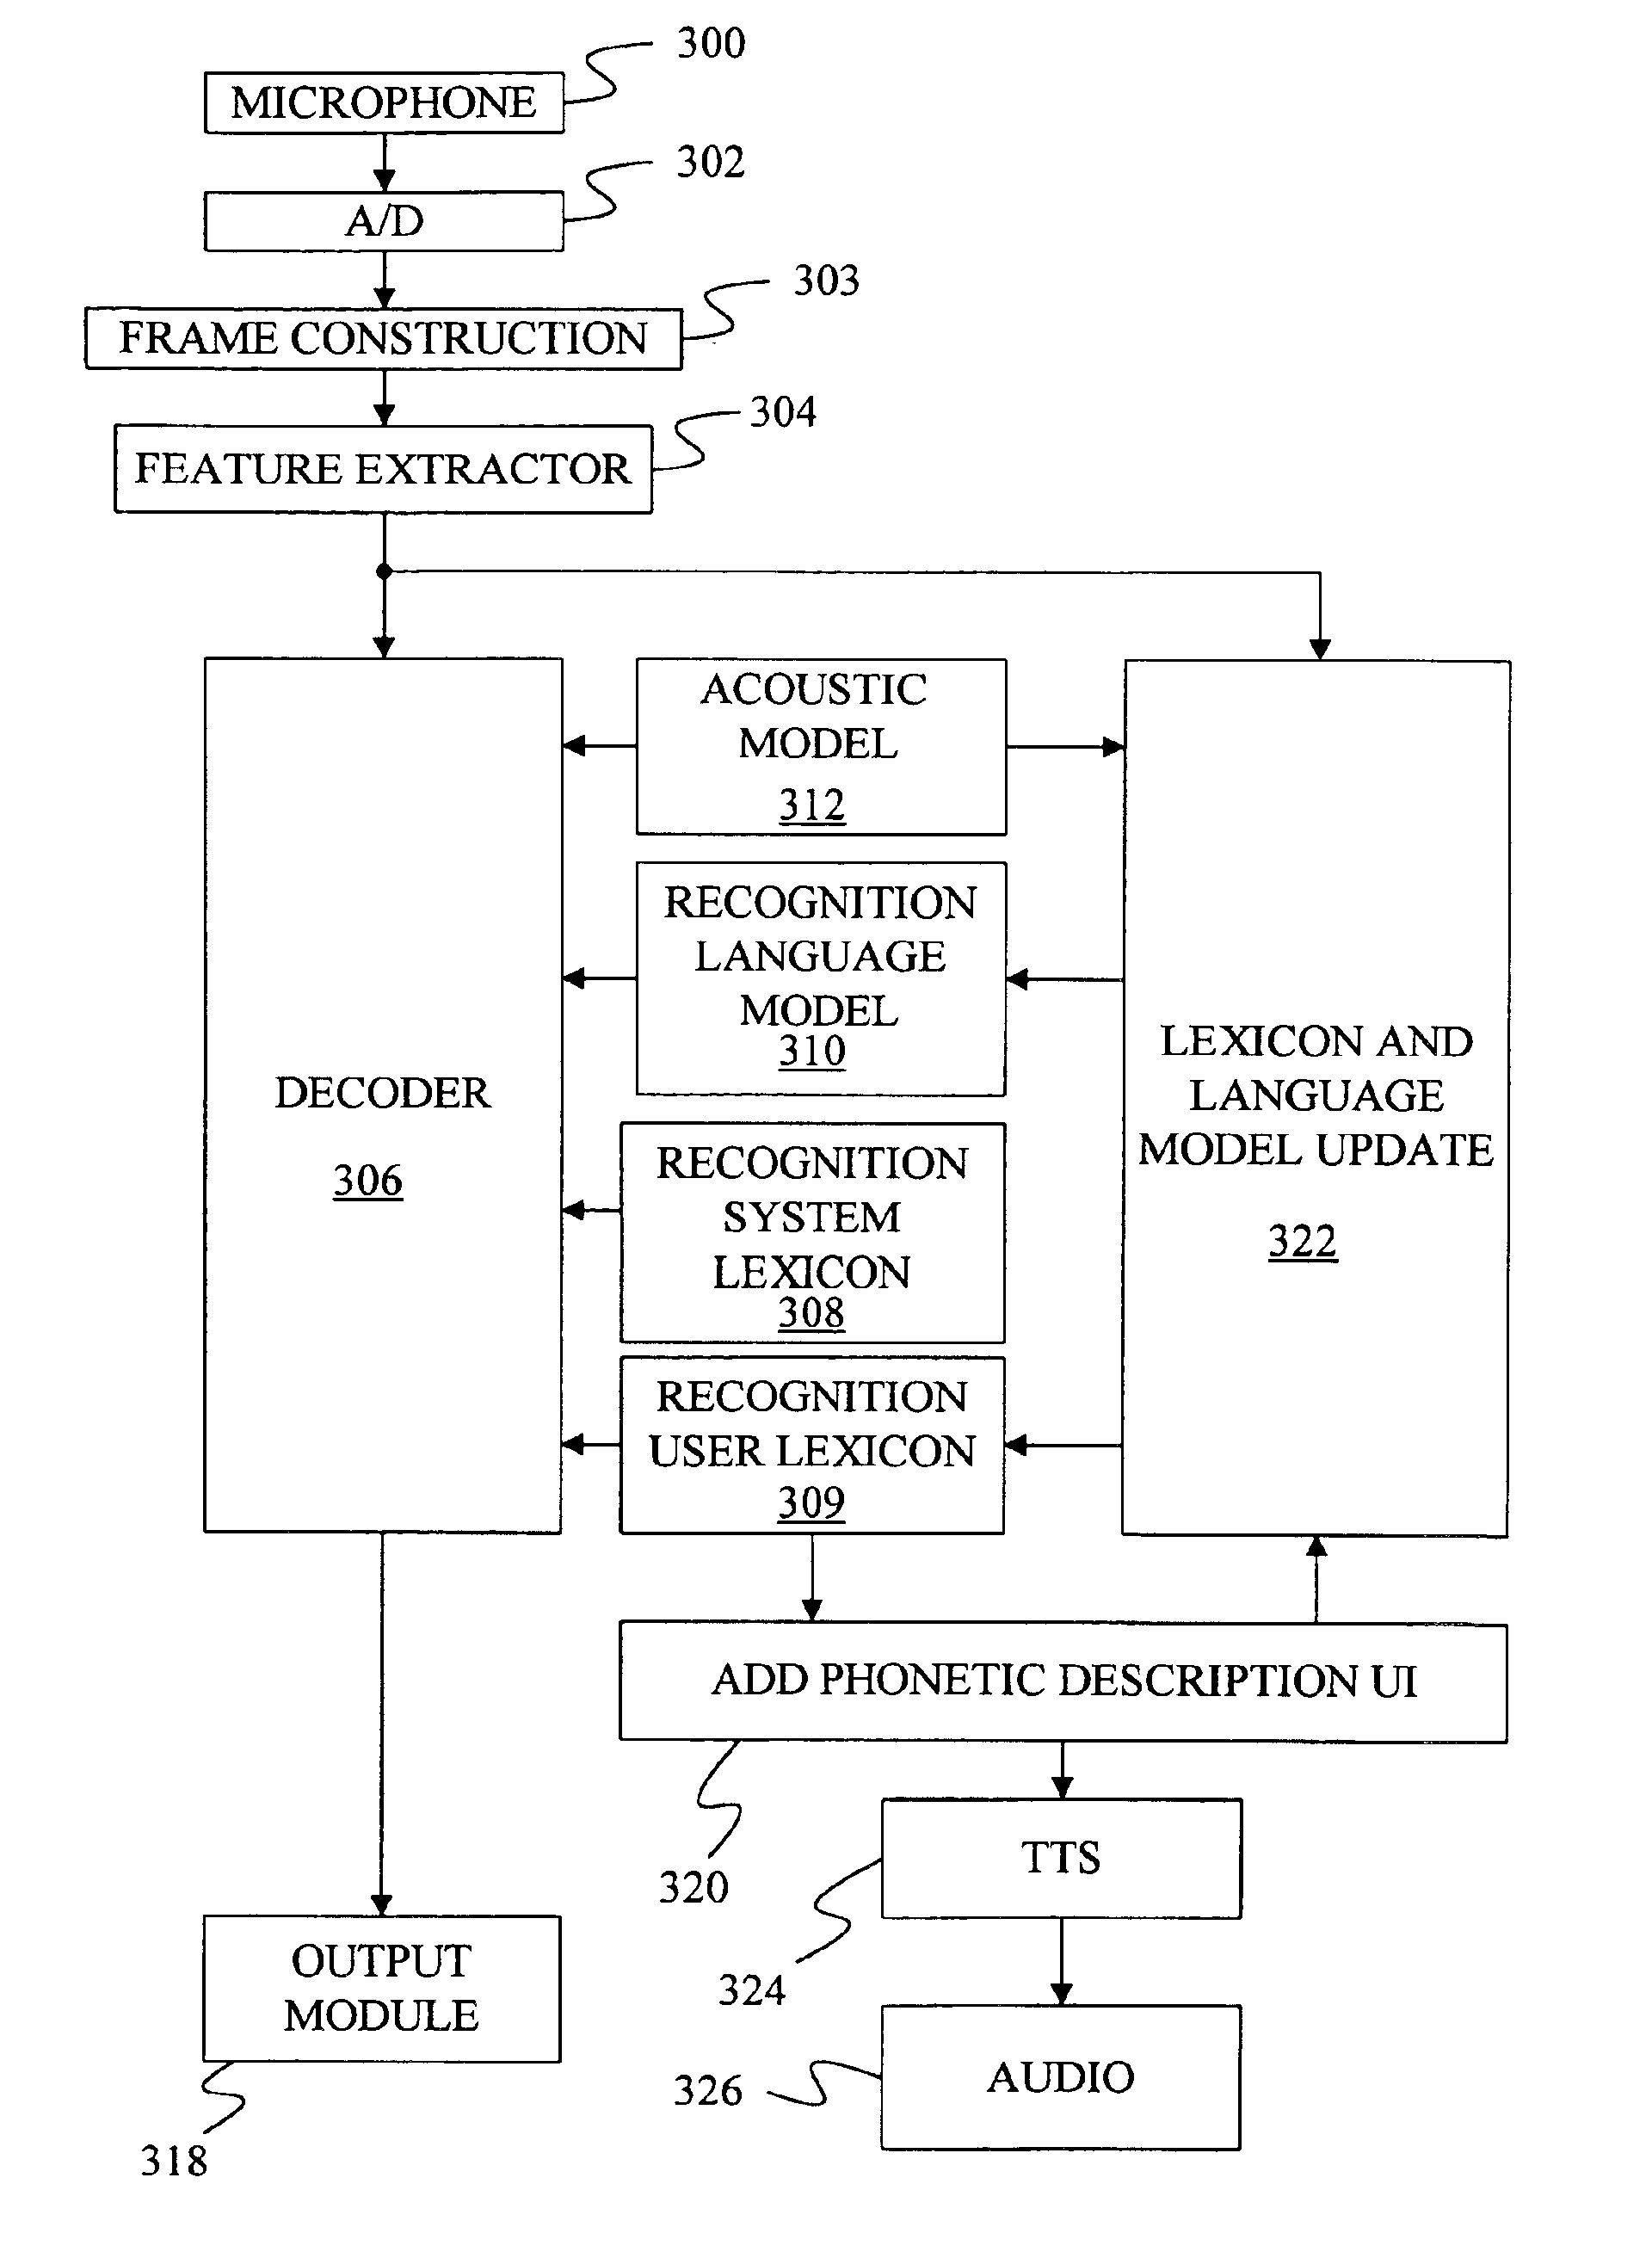 Method for adding phonetic descriptions to a speech recognition lexicon